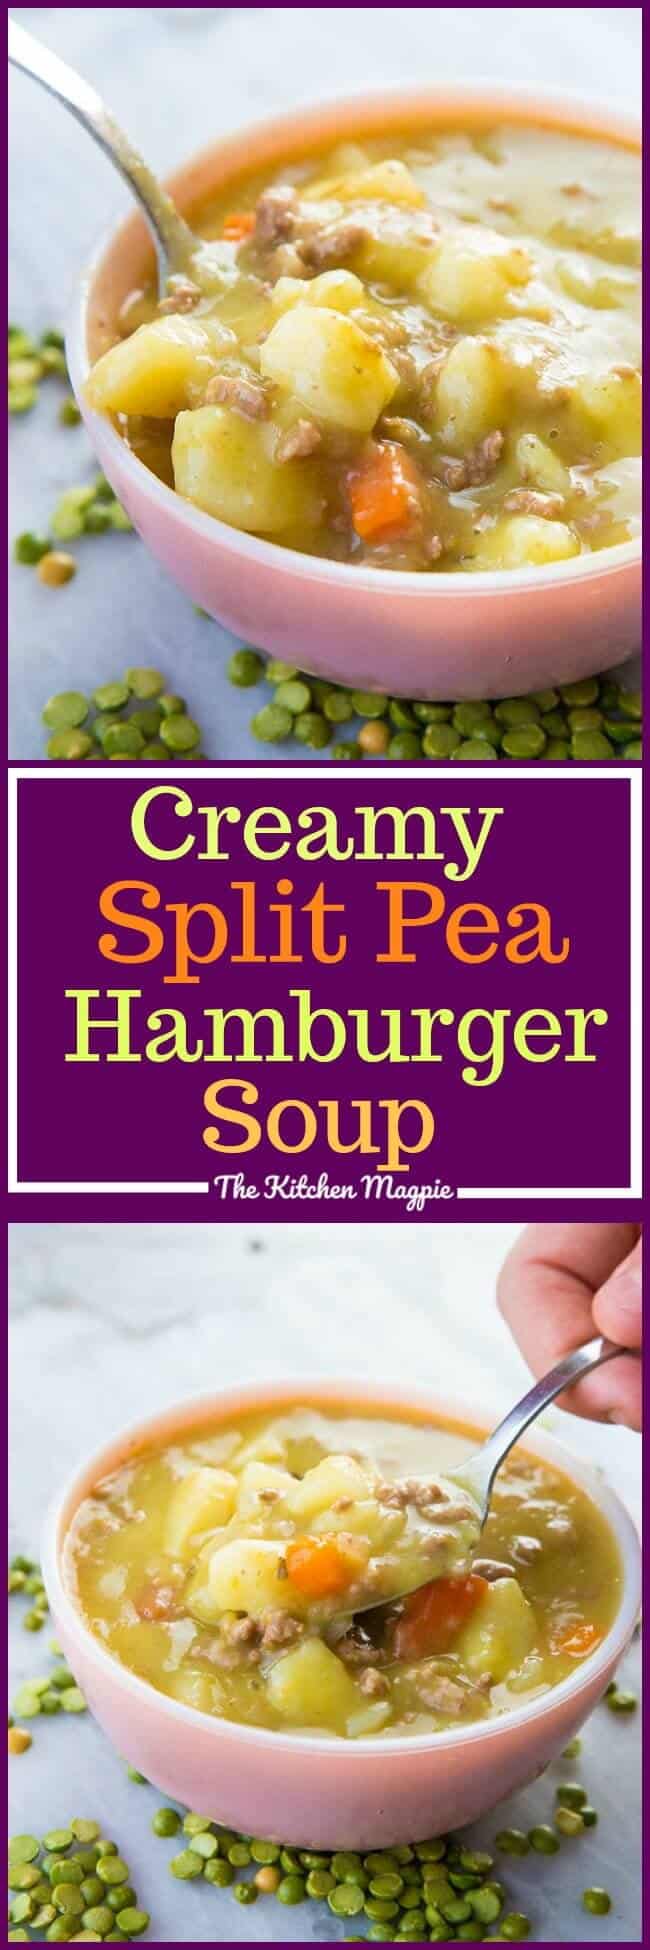 Creamy Split Pea Hamburger Soup done in the Instant Pot or your slow cooker! This hearty soup is chock full of protein and iron and is delicious! #recipe #soup #instantpot #slowcooker #hamburgersoup 